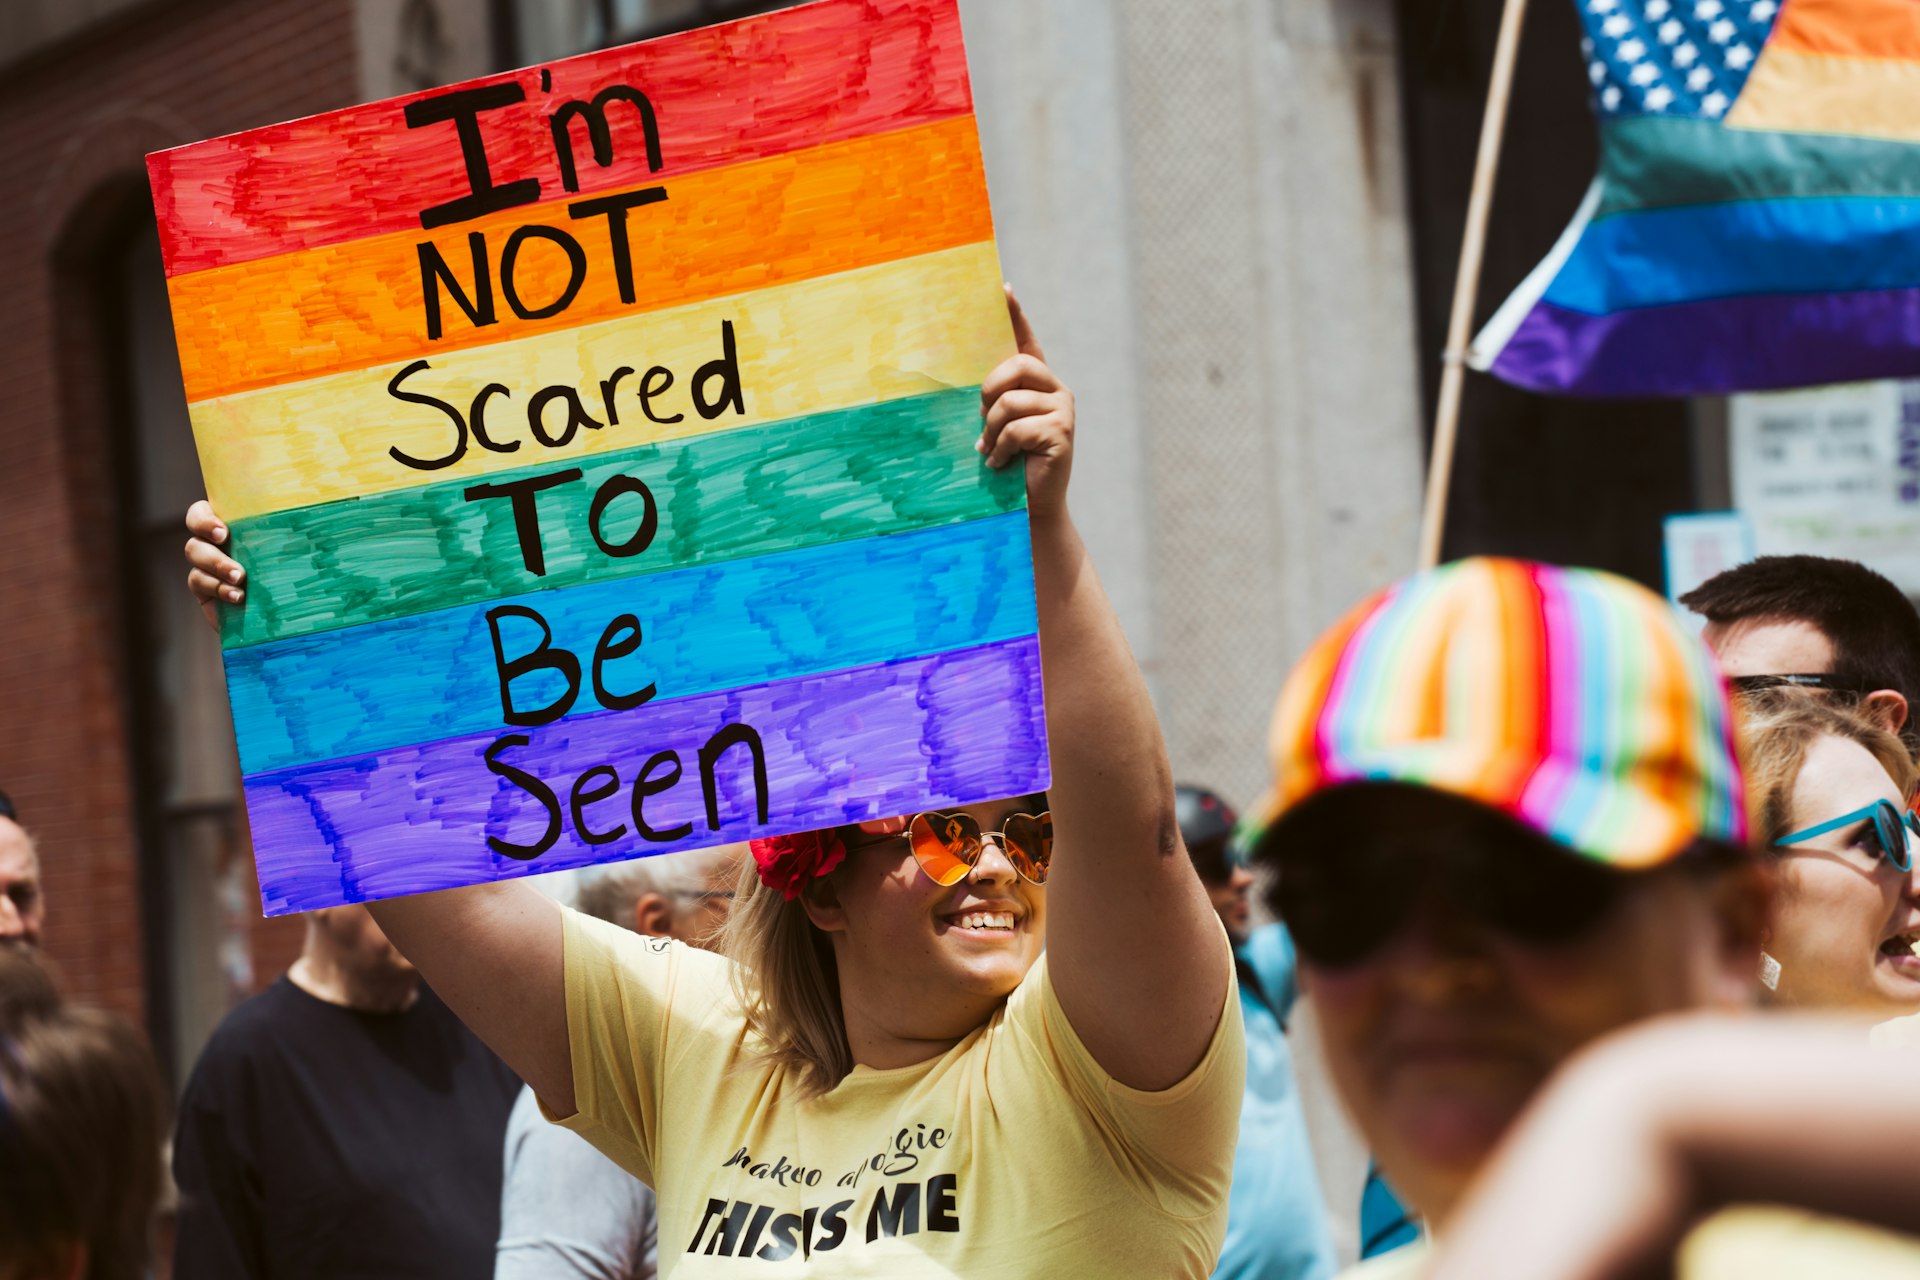 A smiling person at a festival holds up a rainbow-colored sign that says "I'm not scared to be seen"